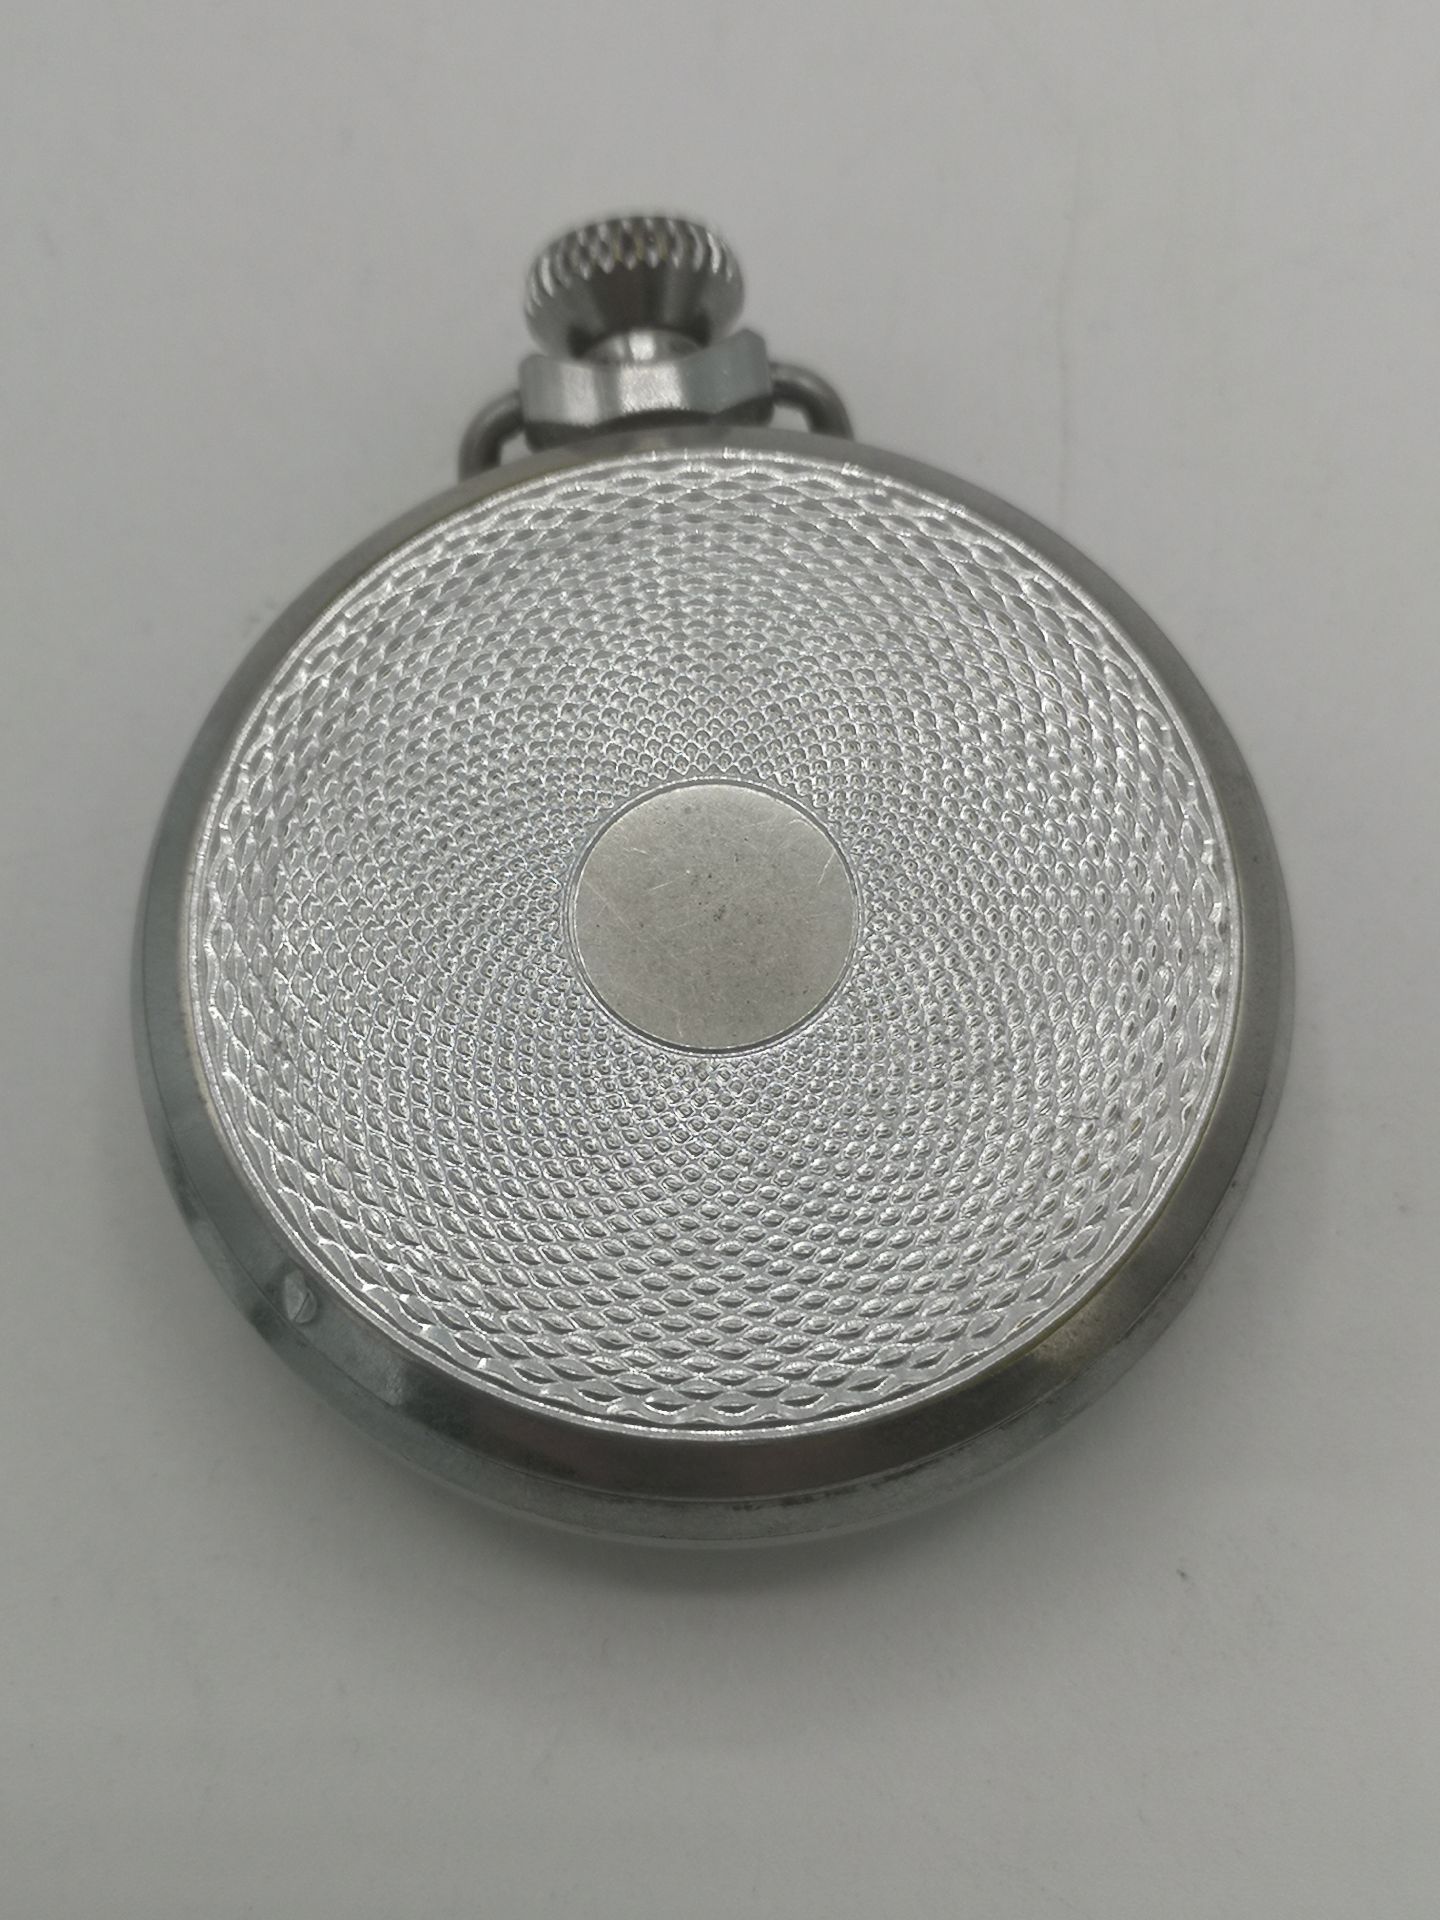 Collection of pocket watches - Image 7 of 23